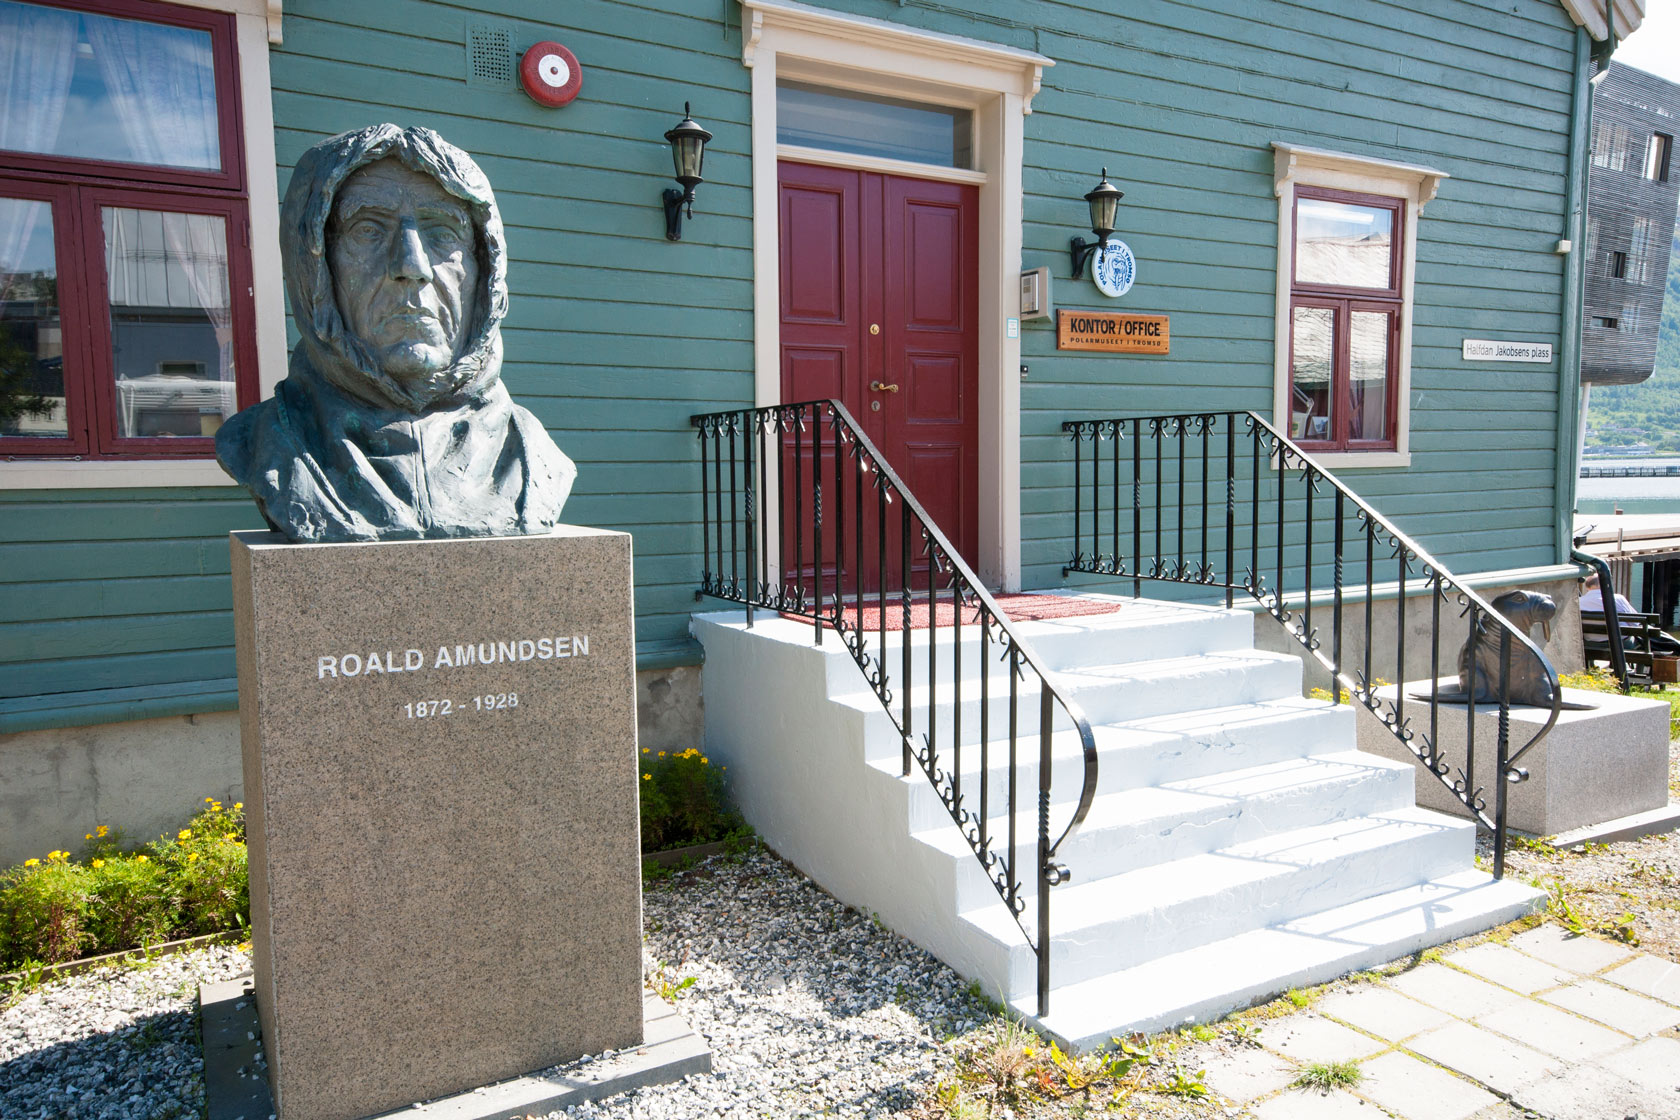 The Polar Museum is in Tromso in the Norwegian arctic and outside is a bust of their famous polar explorer Roald Amundsen who lead the first expedition to reach the south pole.